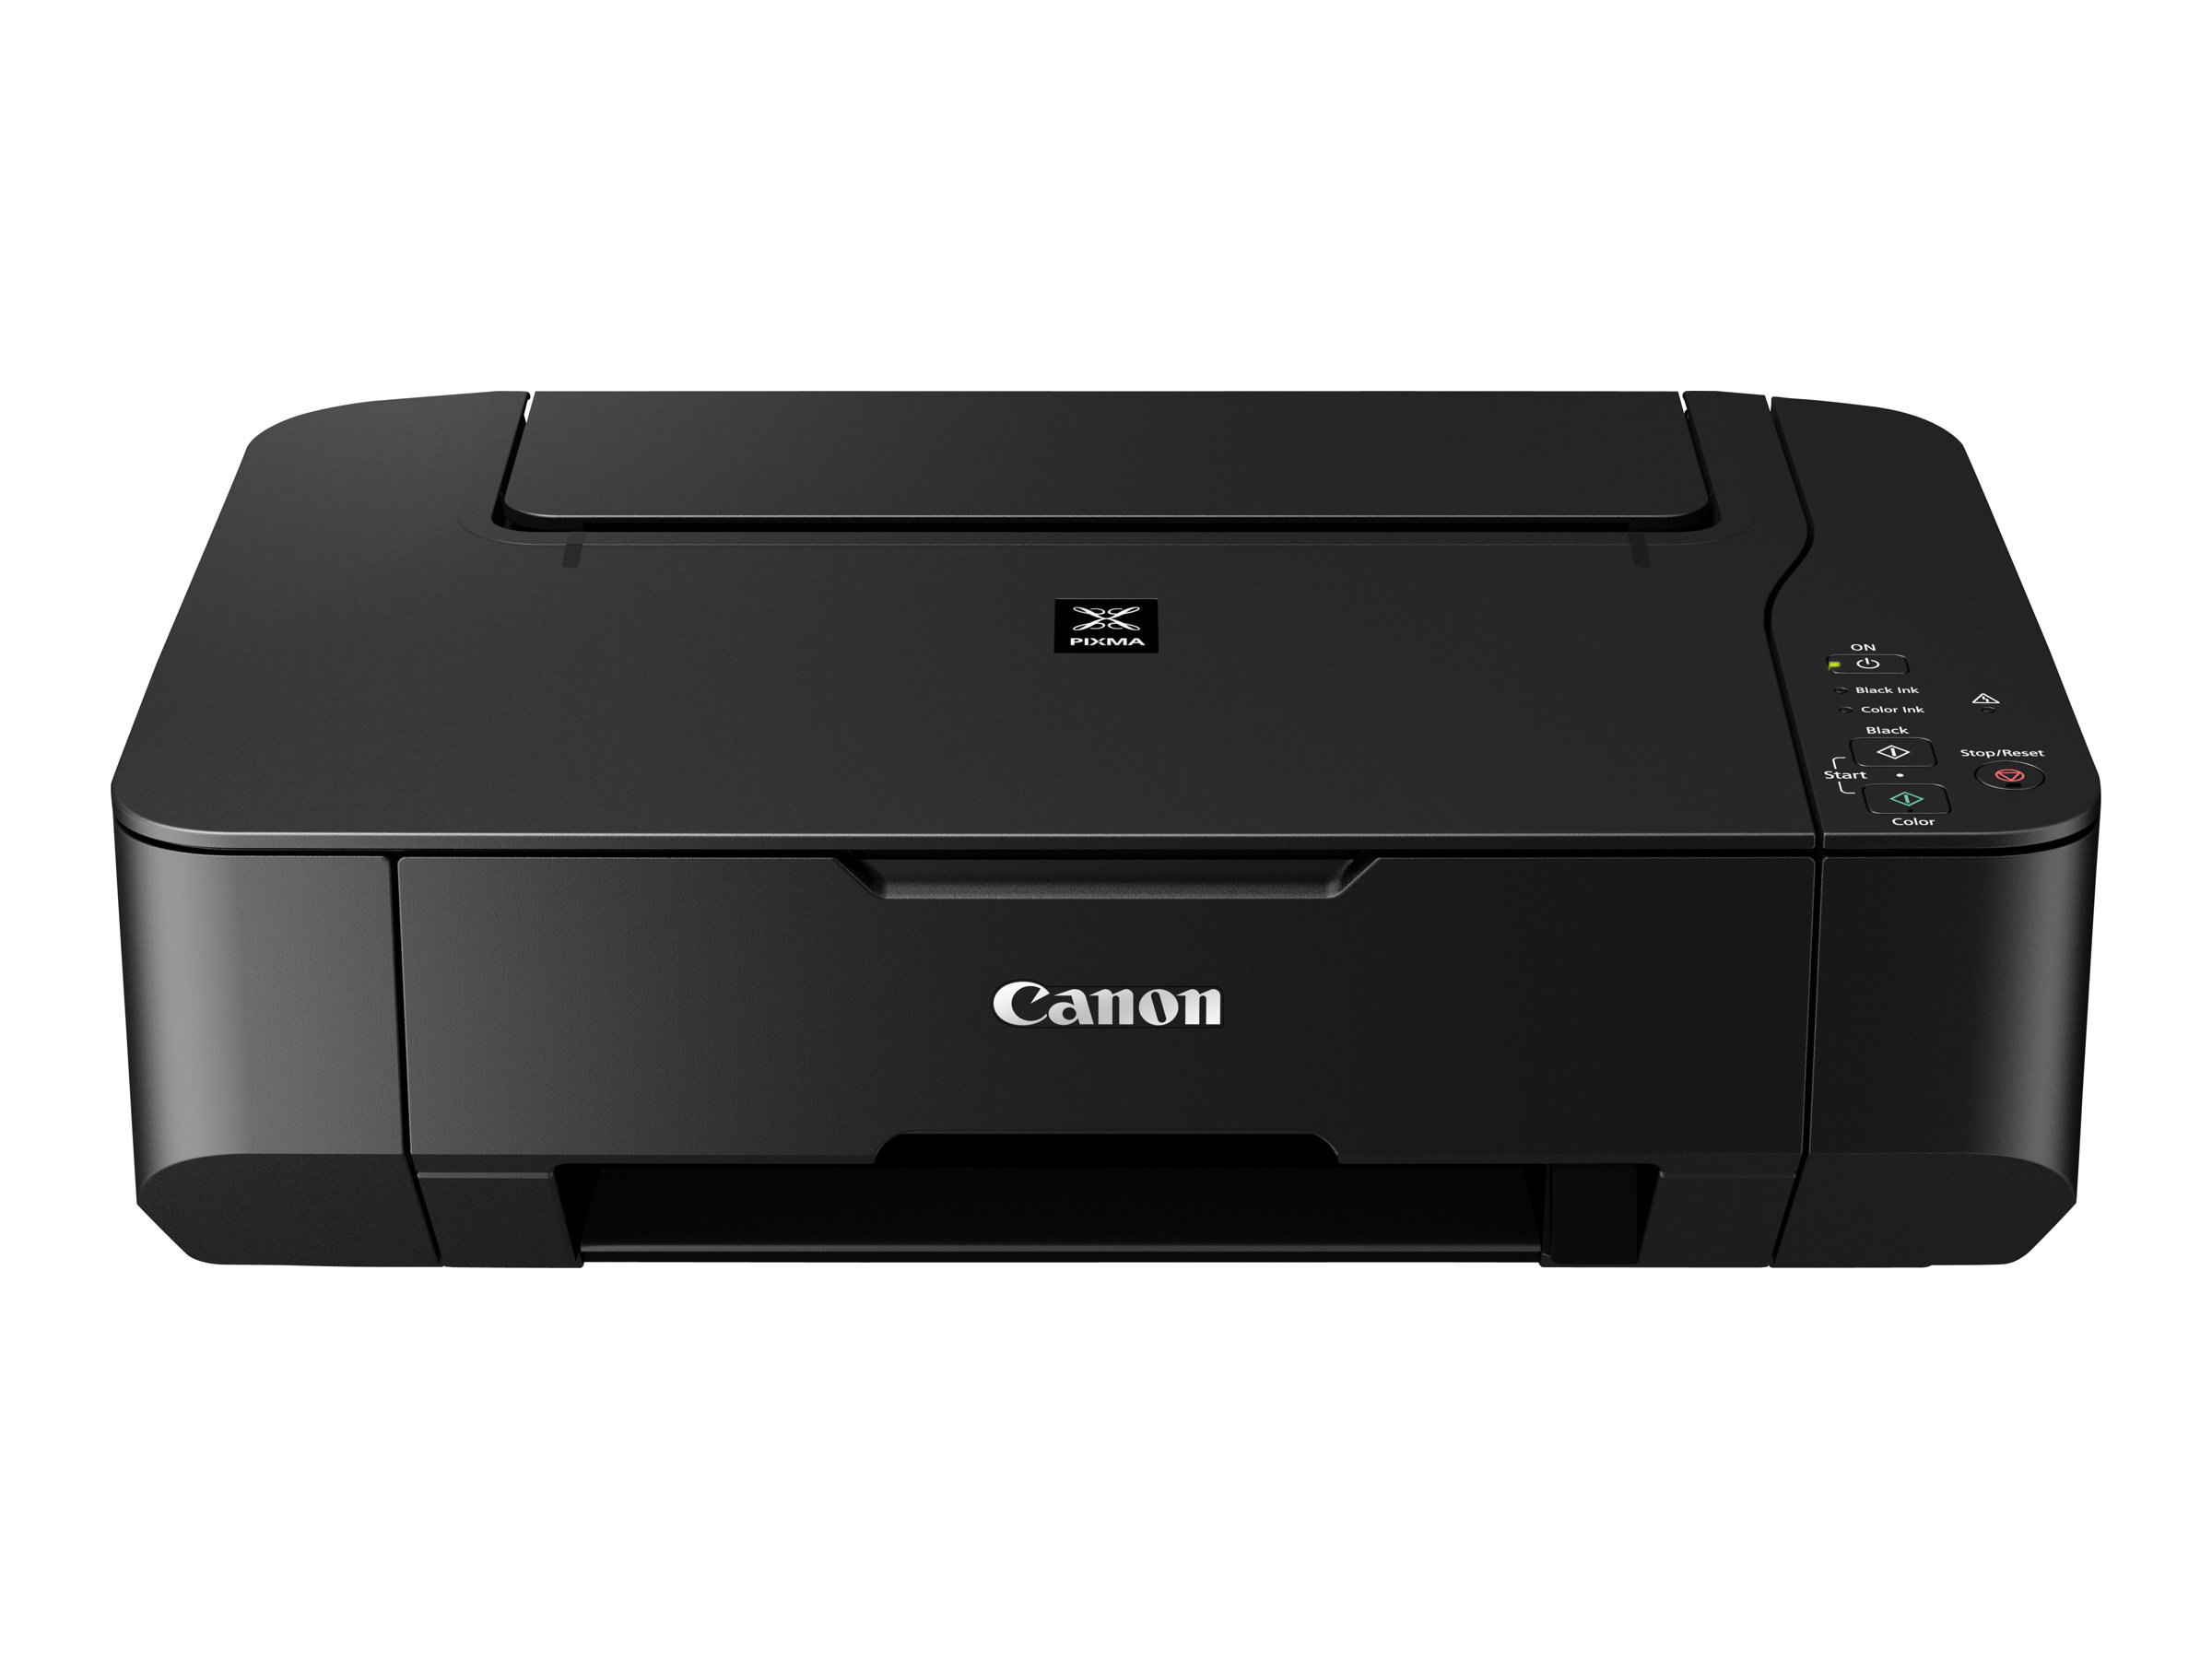 Canon PIXMA MP230 - Multifunction printer - color - ink-jet - 8.5 in x 11.7 in (original) - Legal (media) - up to 7 ipm (printing) - 100 sheets - USB 2.0 - image 3 of 3